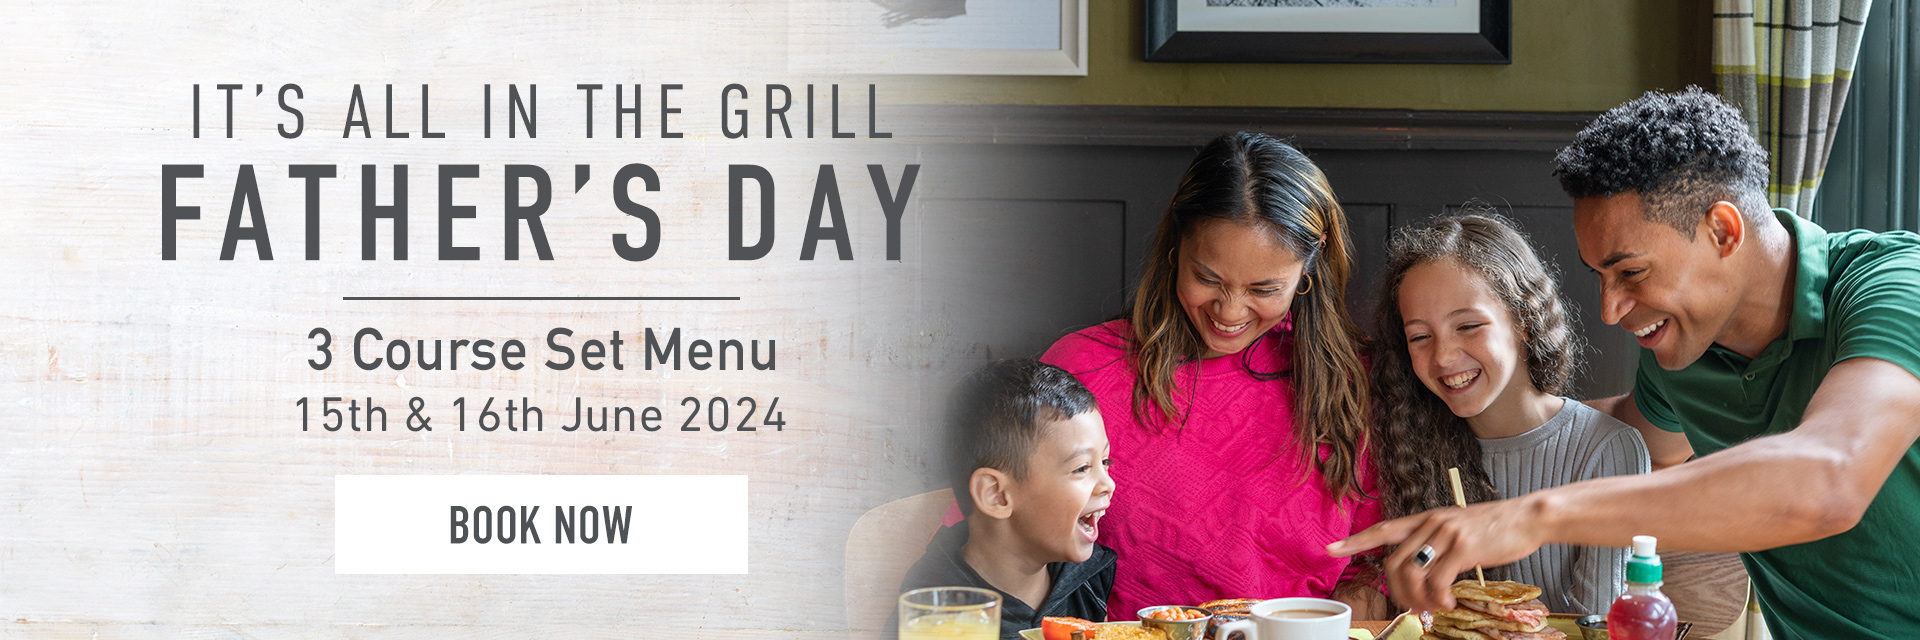 Father’s Day at Harvester Halbeath Park